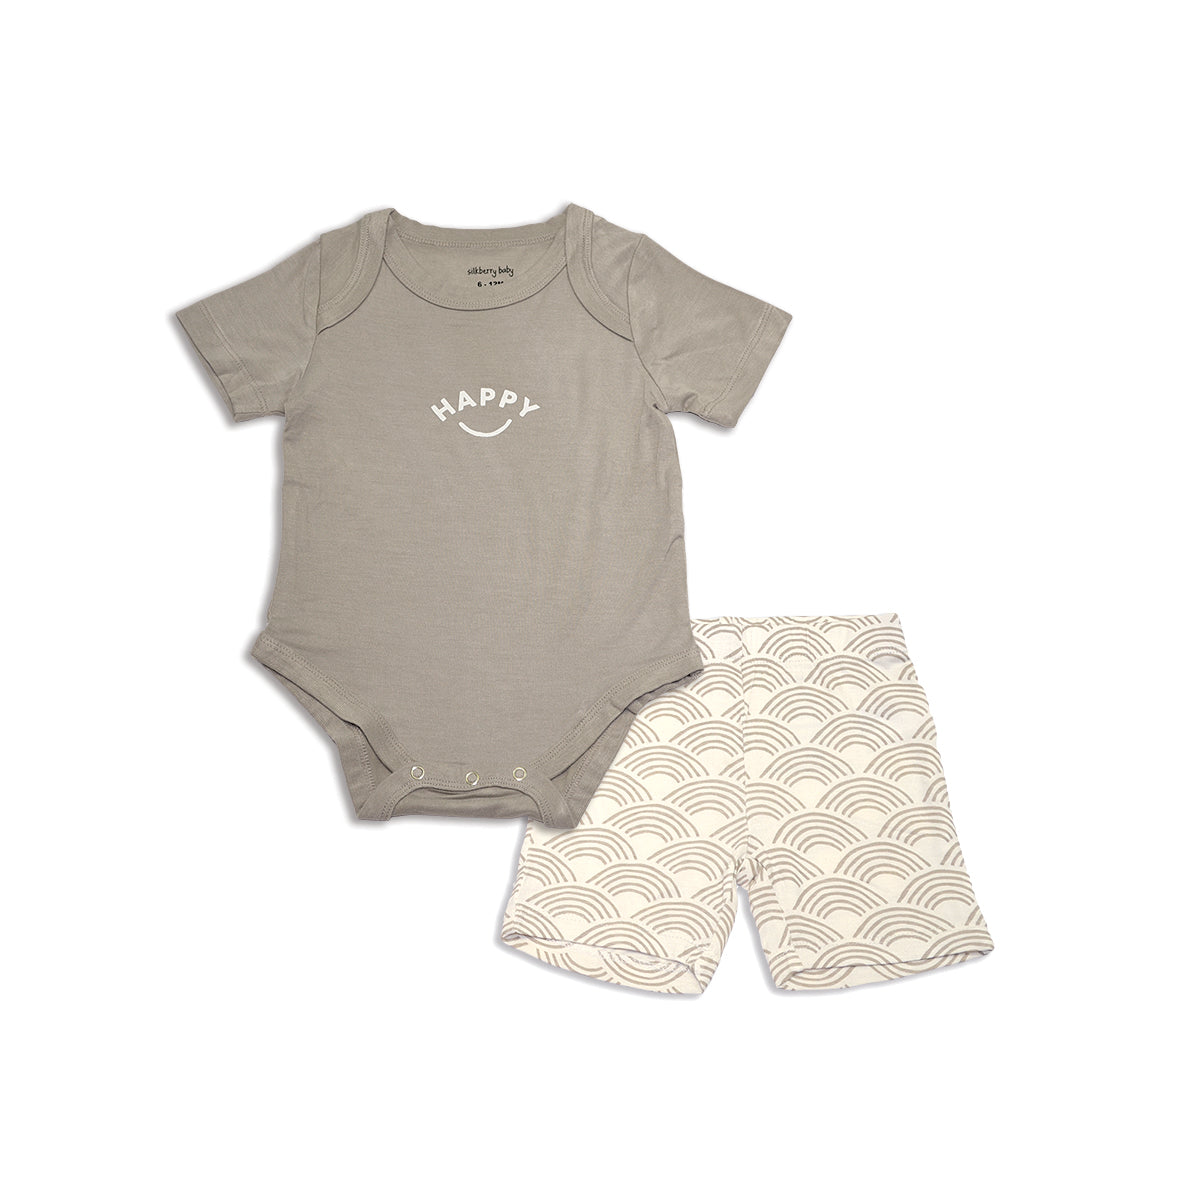 Silkberry Baby - Bamboo Footed Sleeper, Wobbly Wave